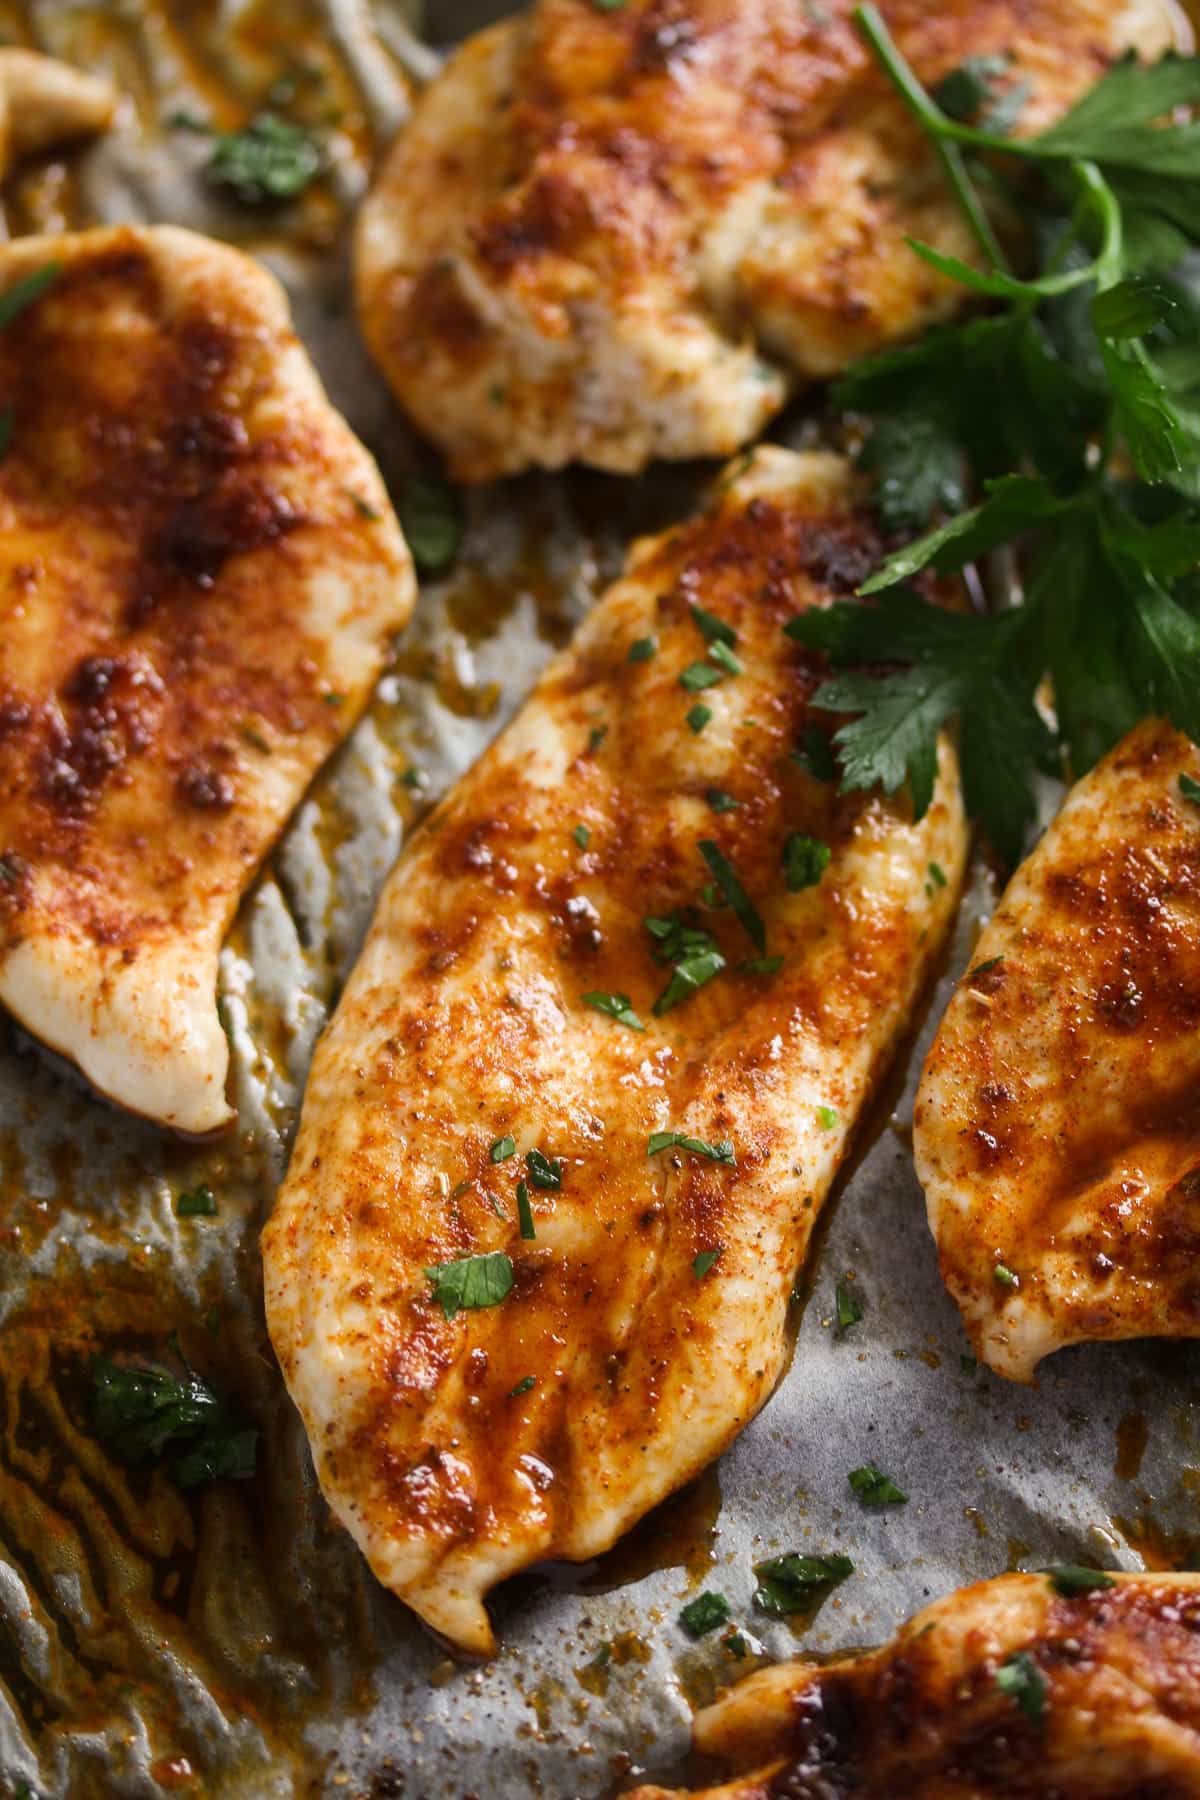 slices of chicken breast on a baking sheet with parsley.